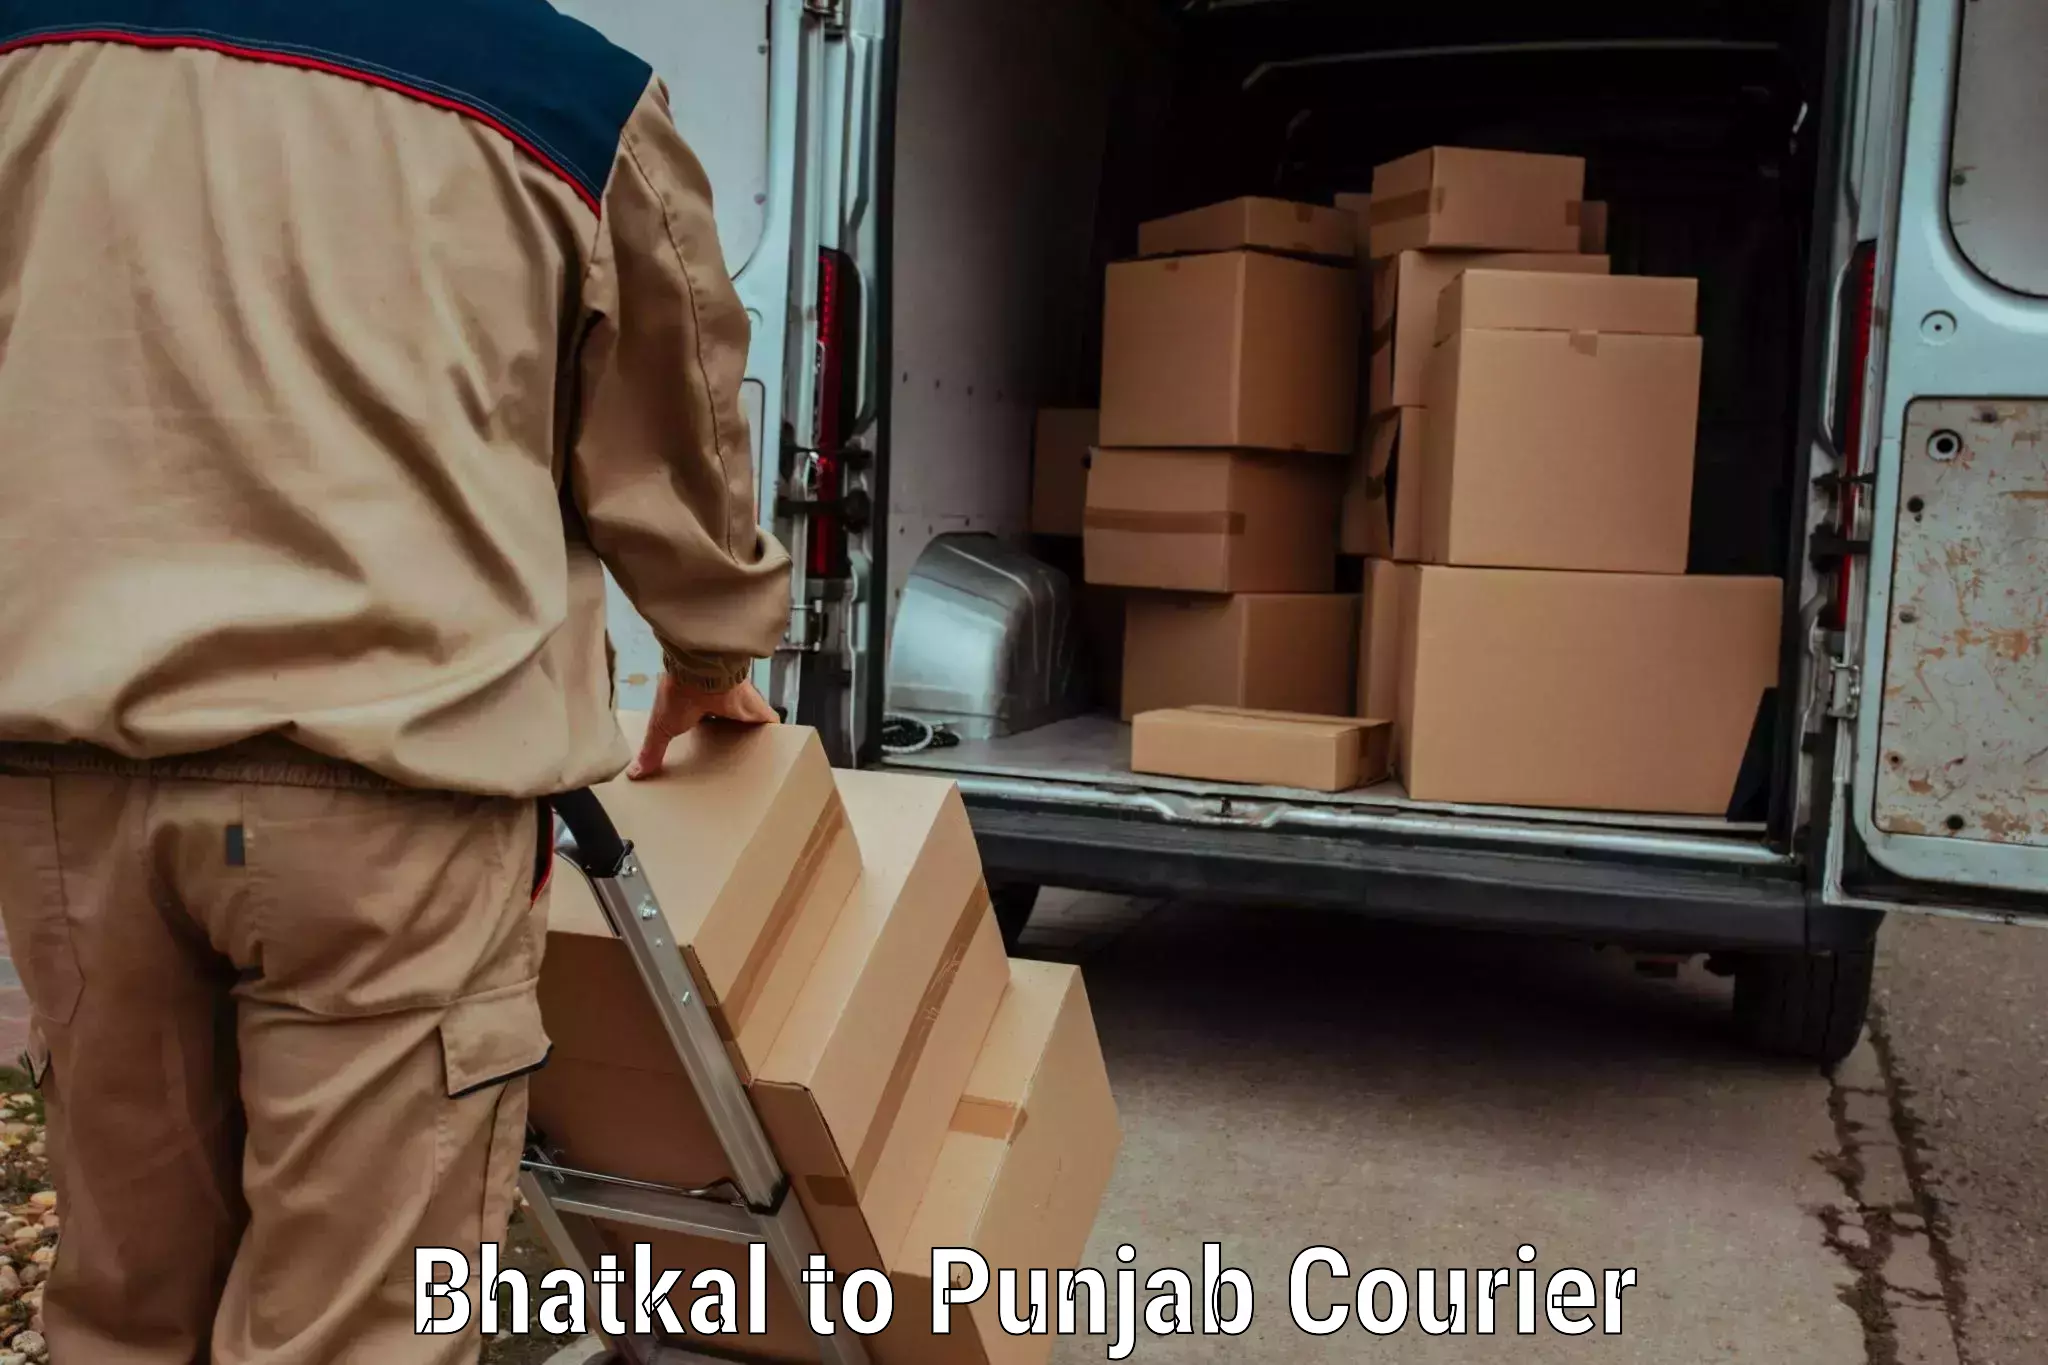 State-of-the-art courier technology Bhatkal to Malerkotla